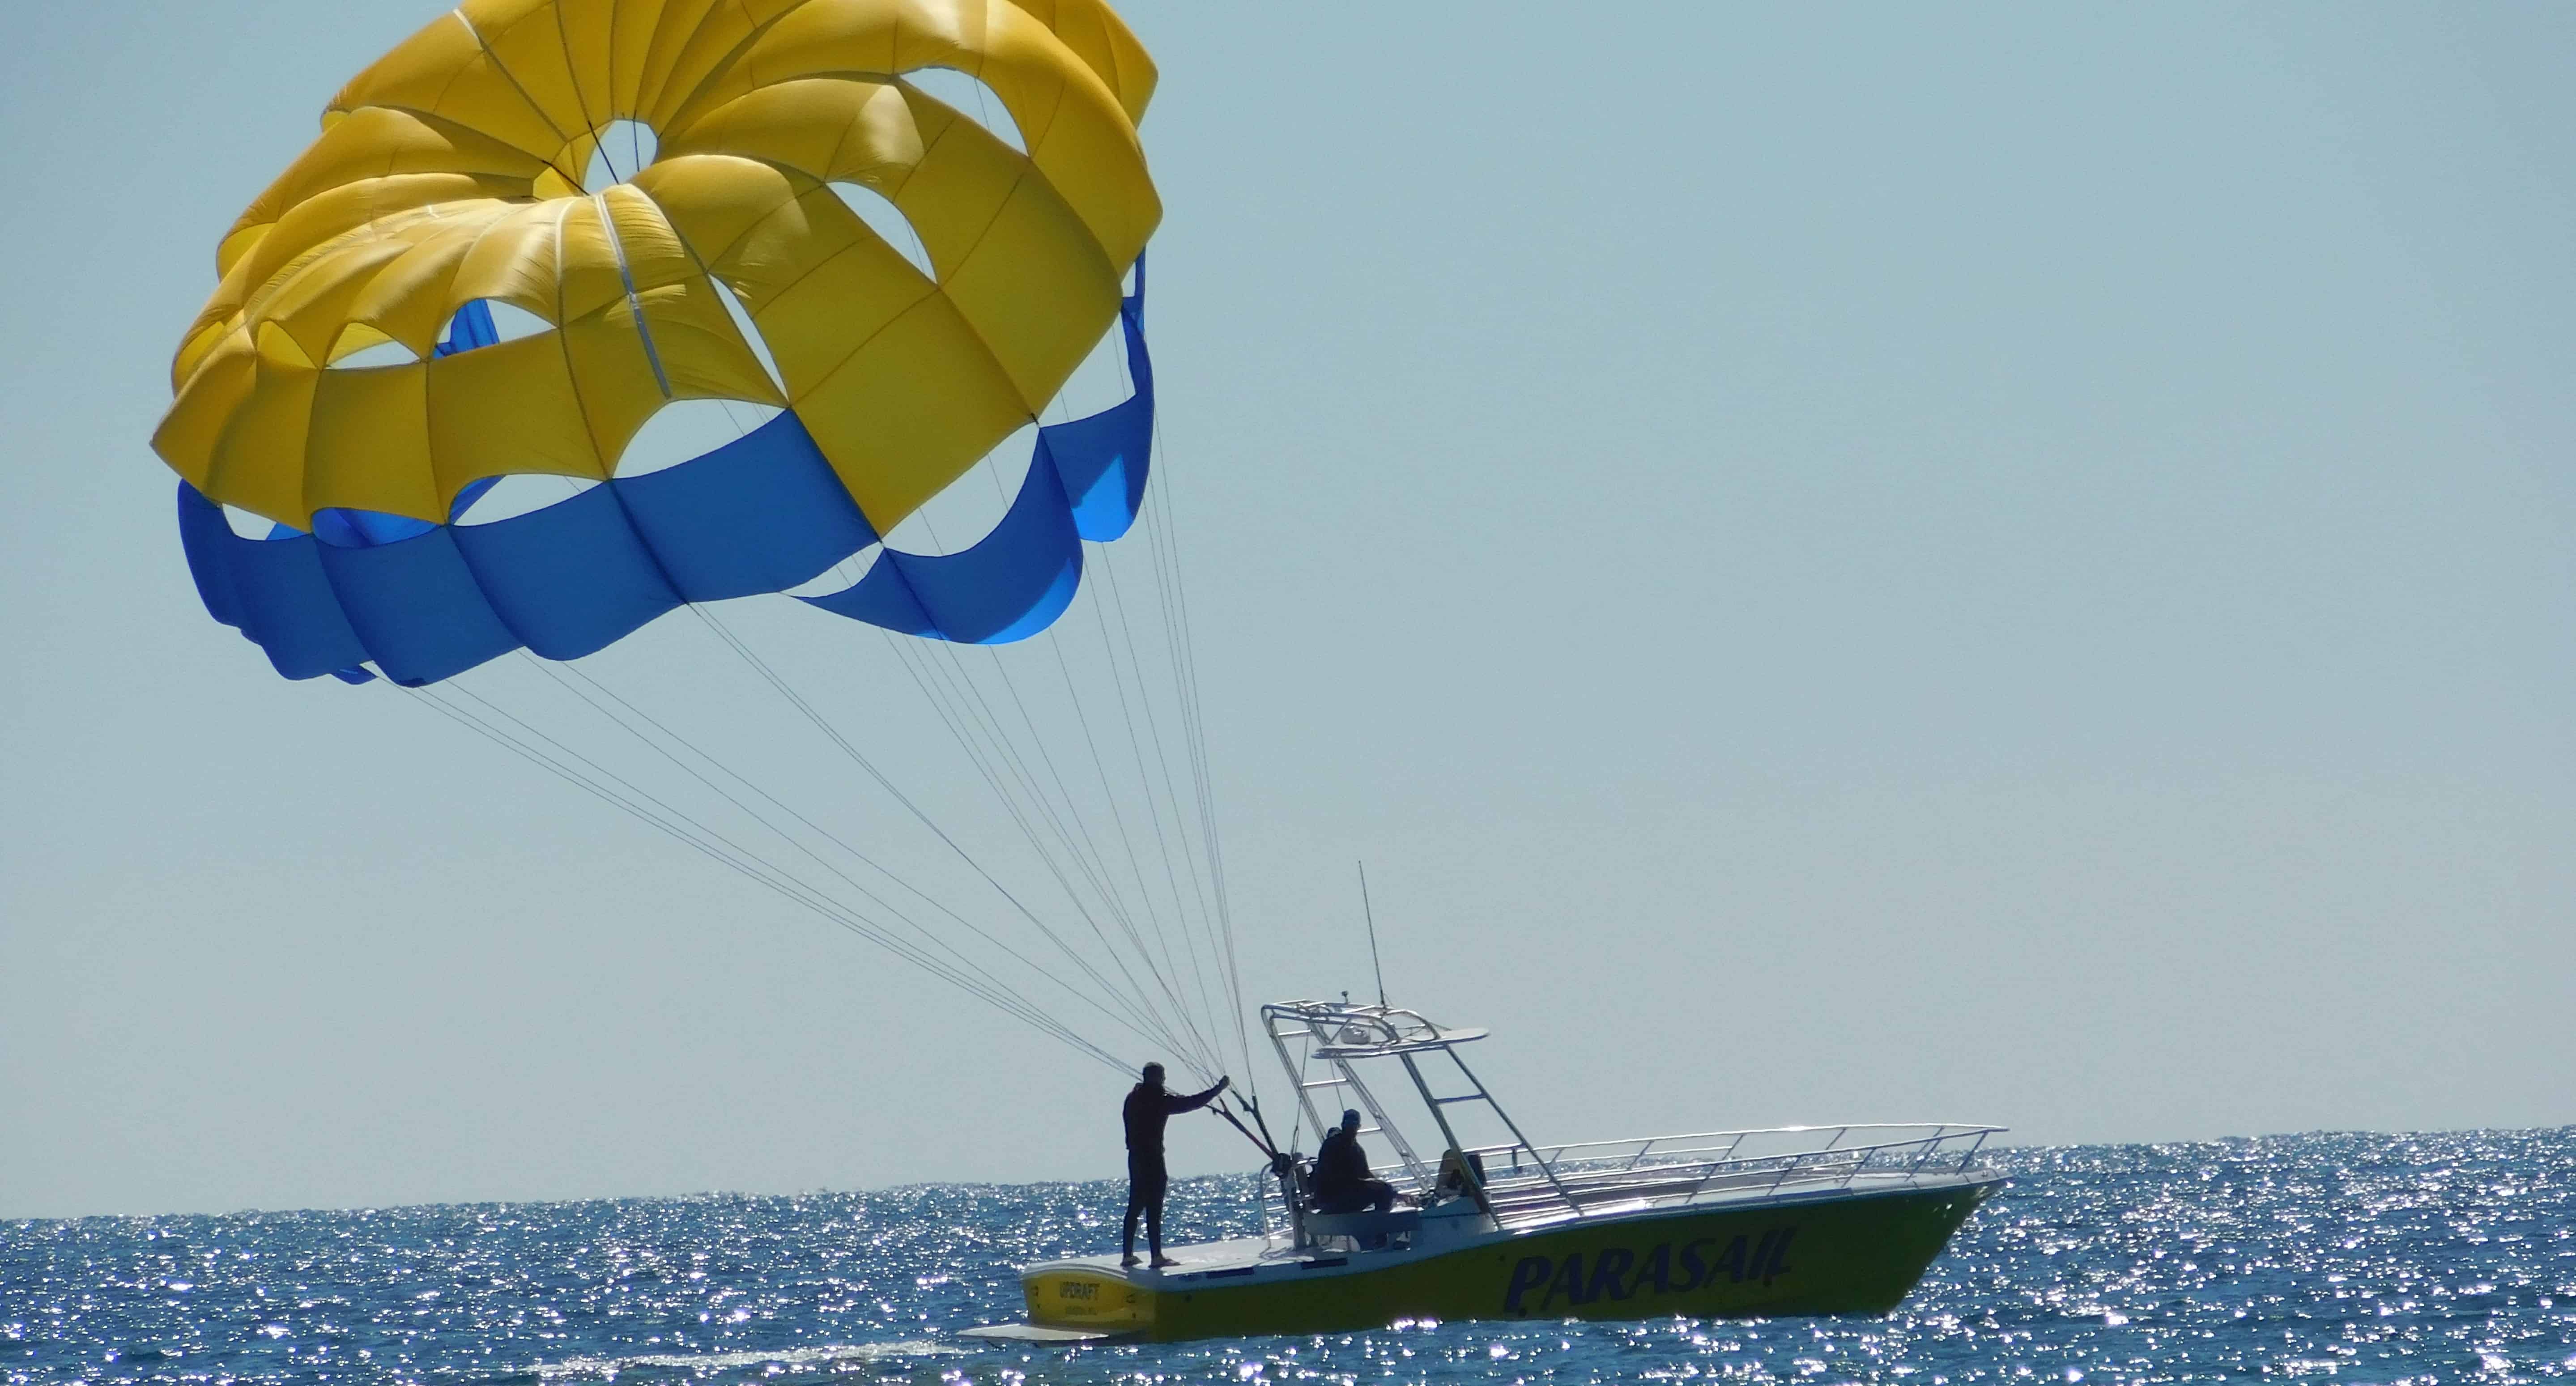 Private-Sky-High-Parasailing-Experience